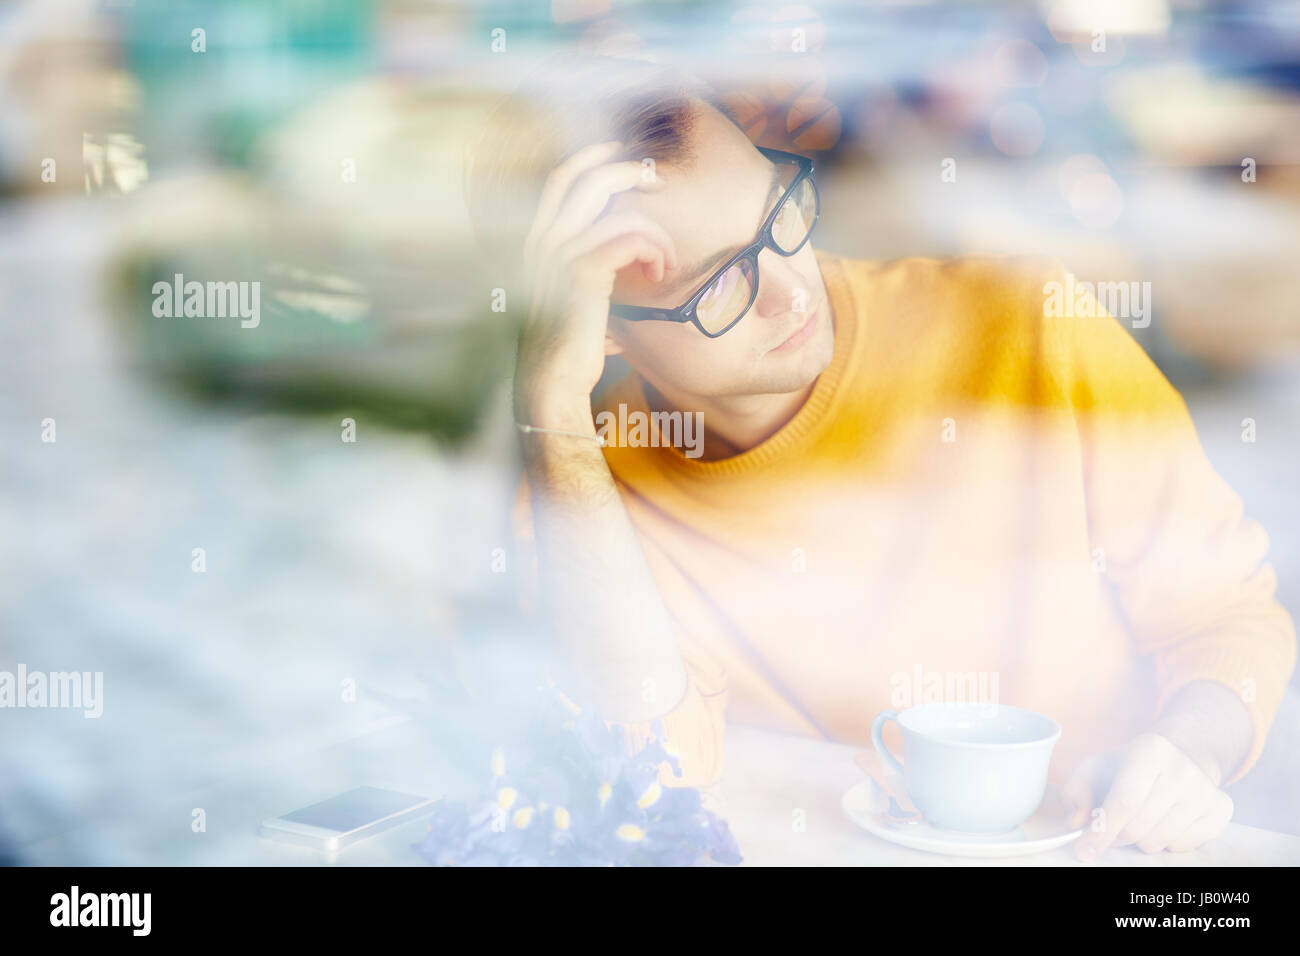 Pensive Man Waiting for Date in Cafe Stock Photo